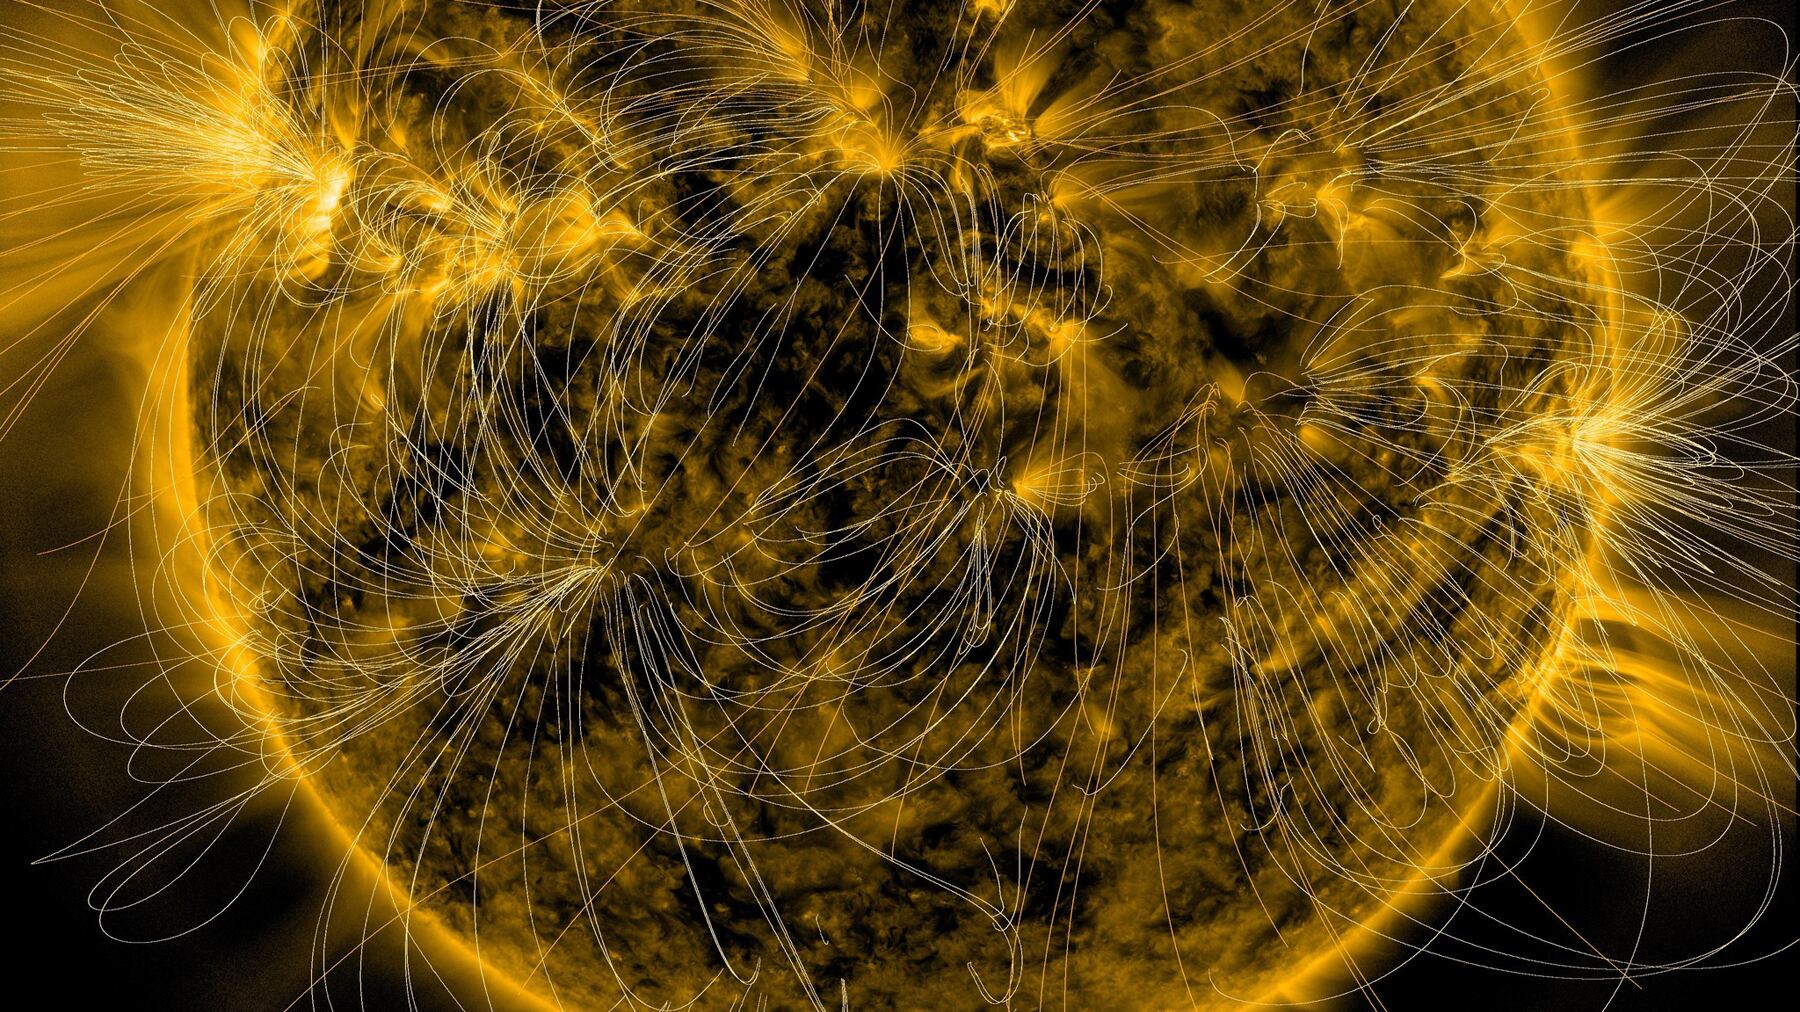 Illustration of the Sun’s magnetic fields over an image captured by Nasa’s Solar Dynamics Observatory (Nasa/SDO/AIA/LMSAL)